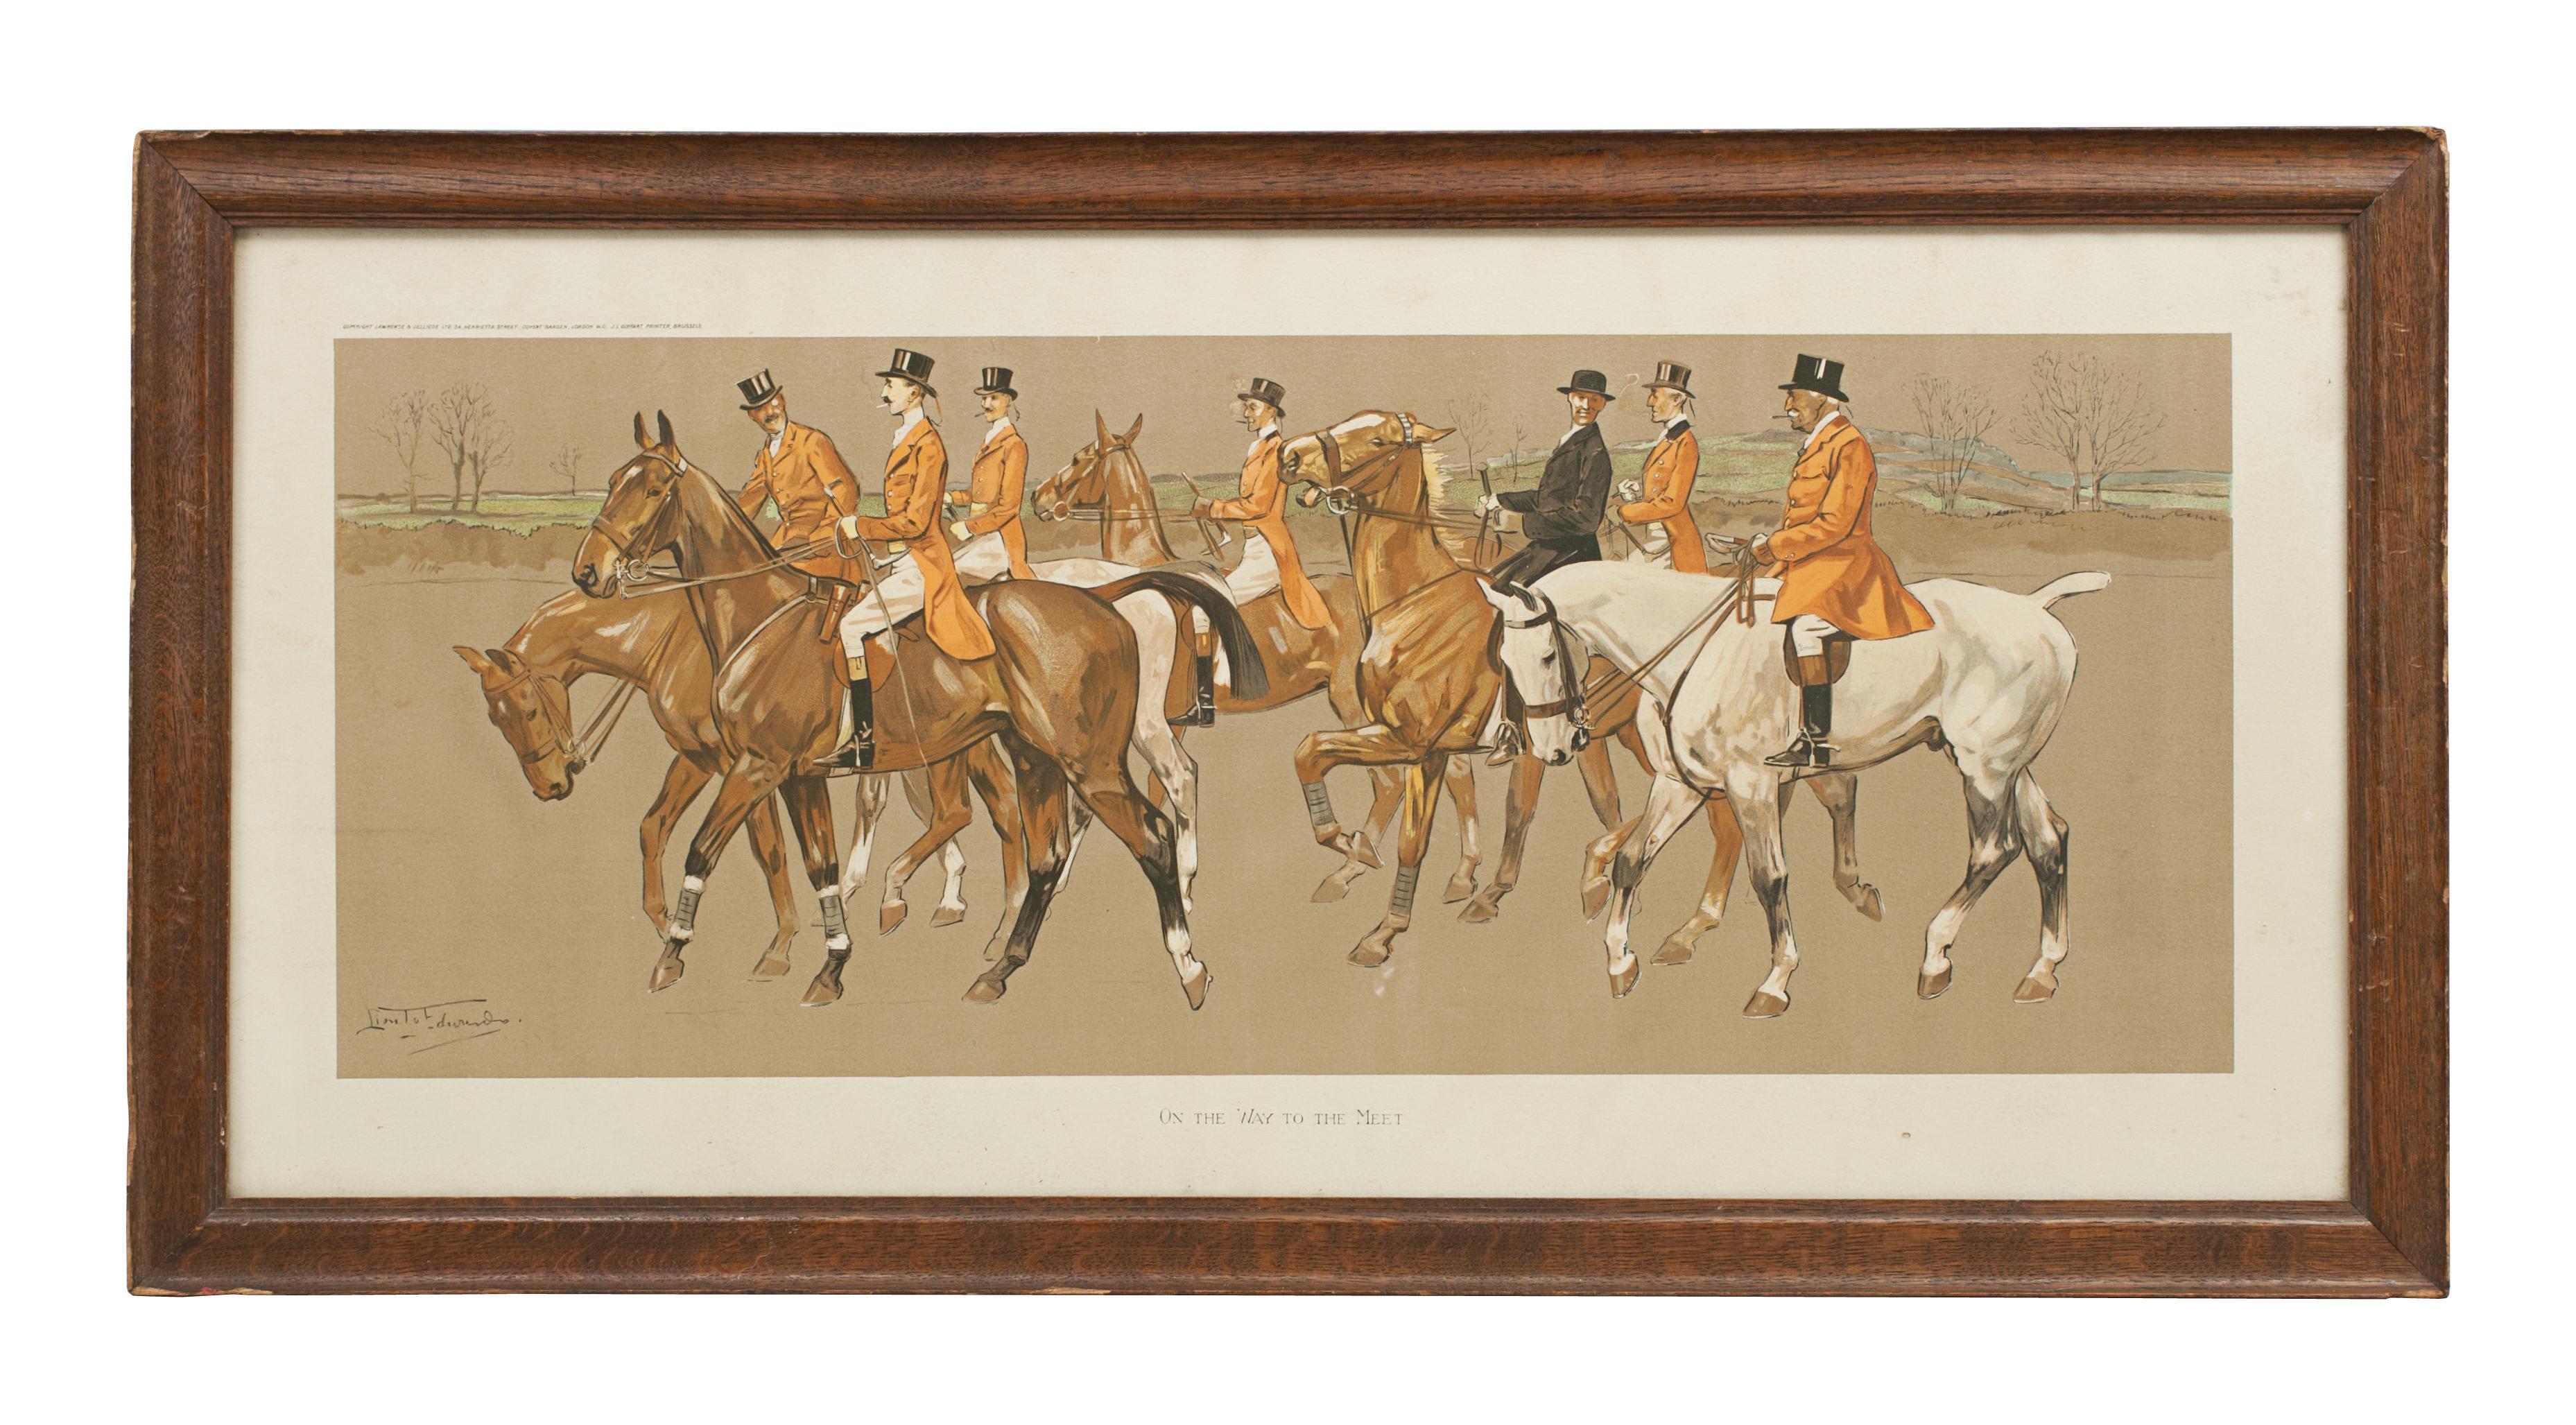 Lionel Edwards Equestrian Chromolithographs.
A pair of Lionel Edwards equestrian prints titled 'On The Way To The Meet' and 'The Lucky Man'. The two original Lionel Edwards prints are framed in period oak frames and were originally from a set of